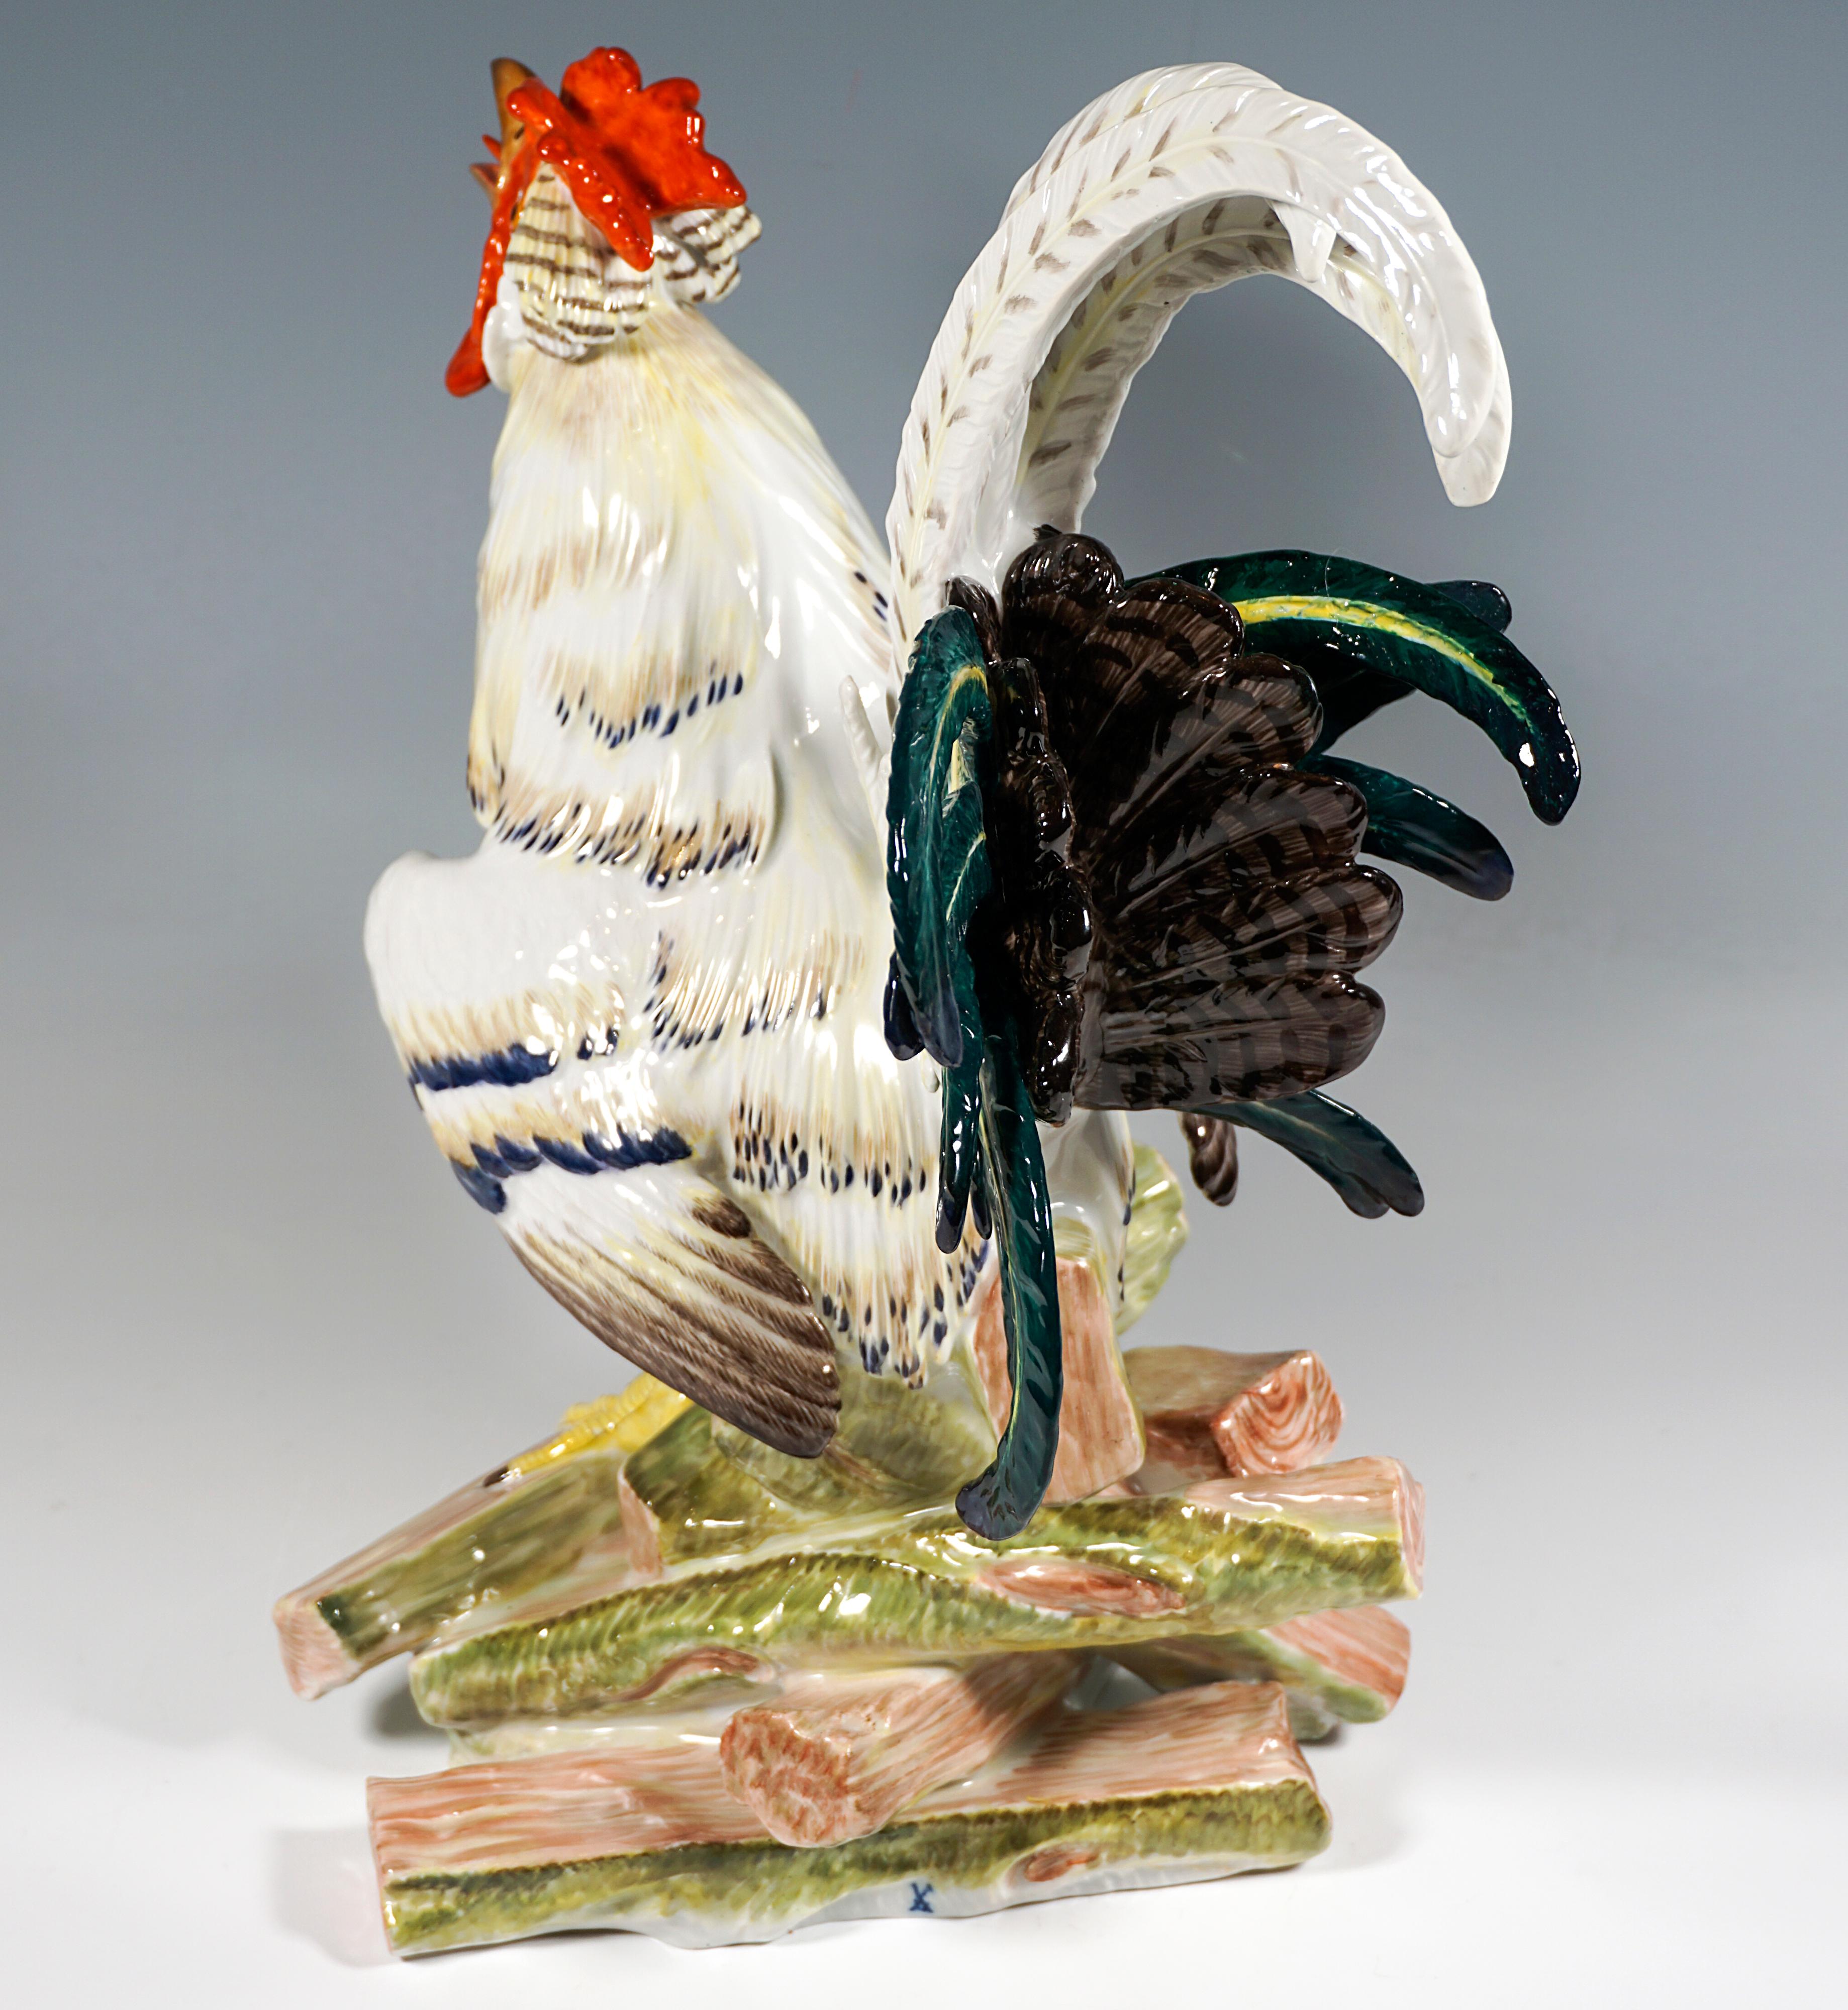 Hand-Crafted Meissen Animal Figure, Rooster On Wood Pile, by J.J. Kaendler, Germany, 20th For Sale